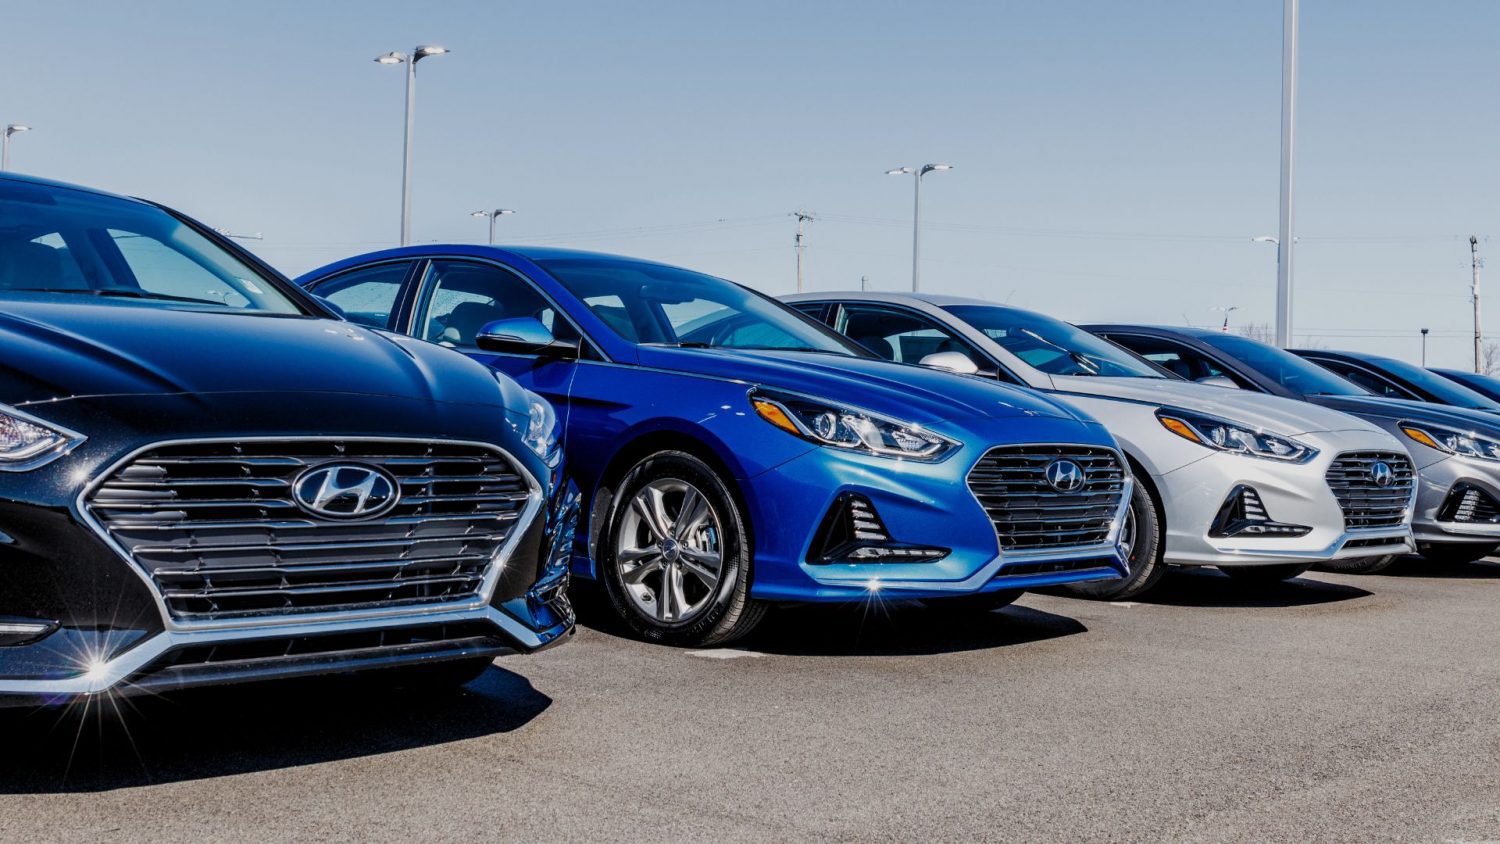 Hyundai Capital America allegedly repossessed 26 cars whose owners had started making loan payments before reporting for active service.